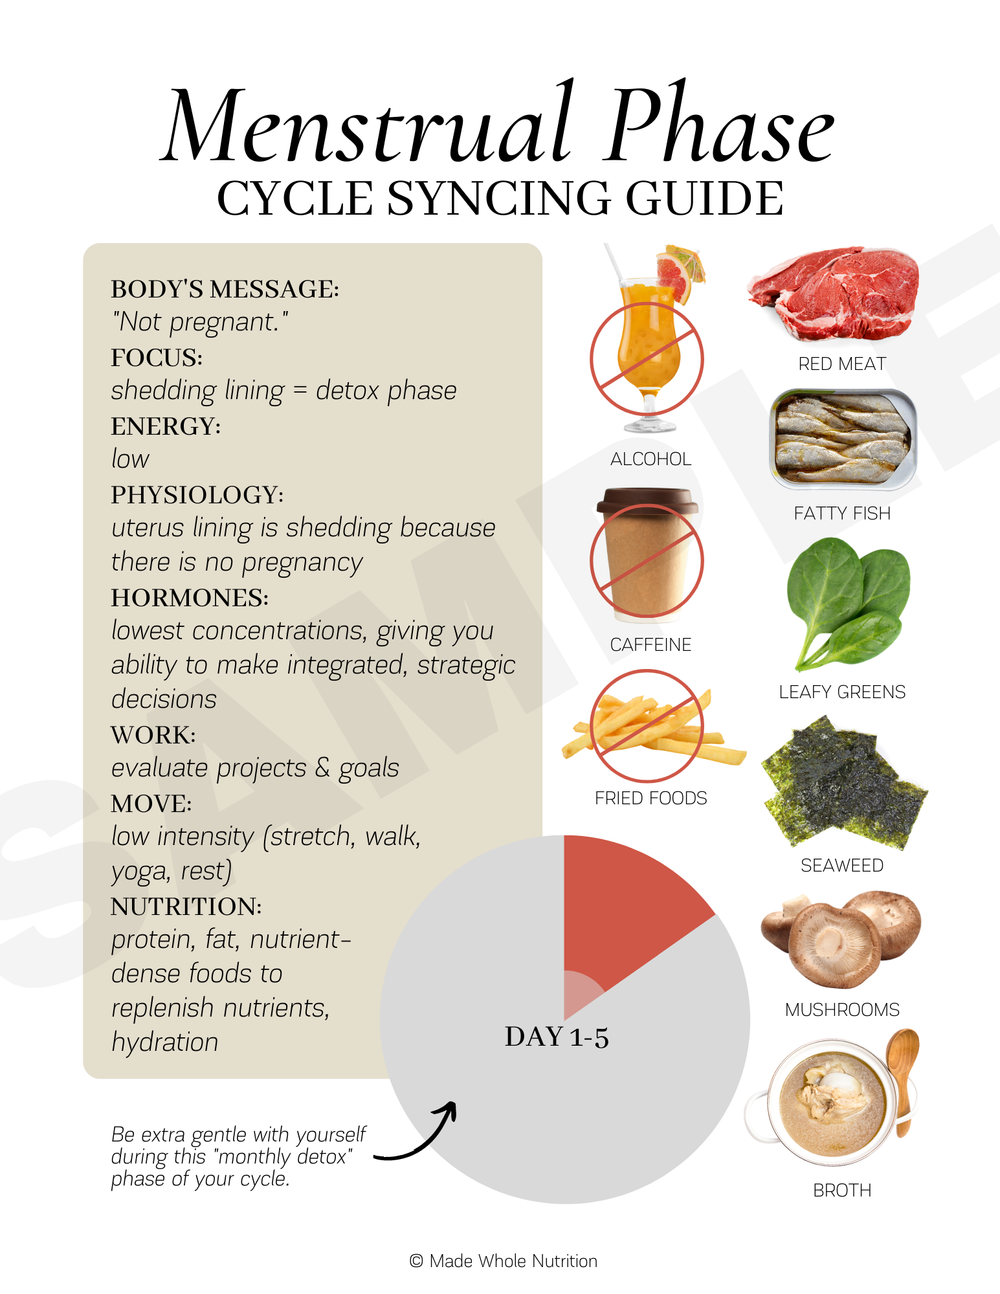 The ultimate guide to CycleSyncing